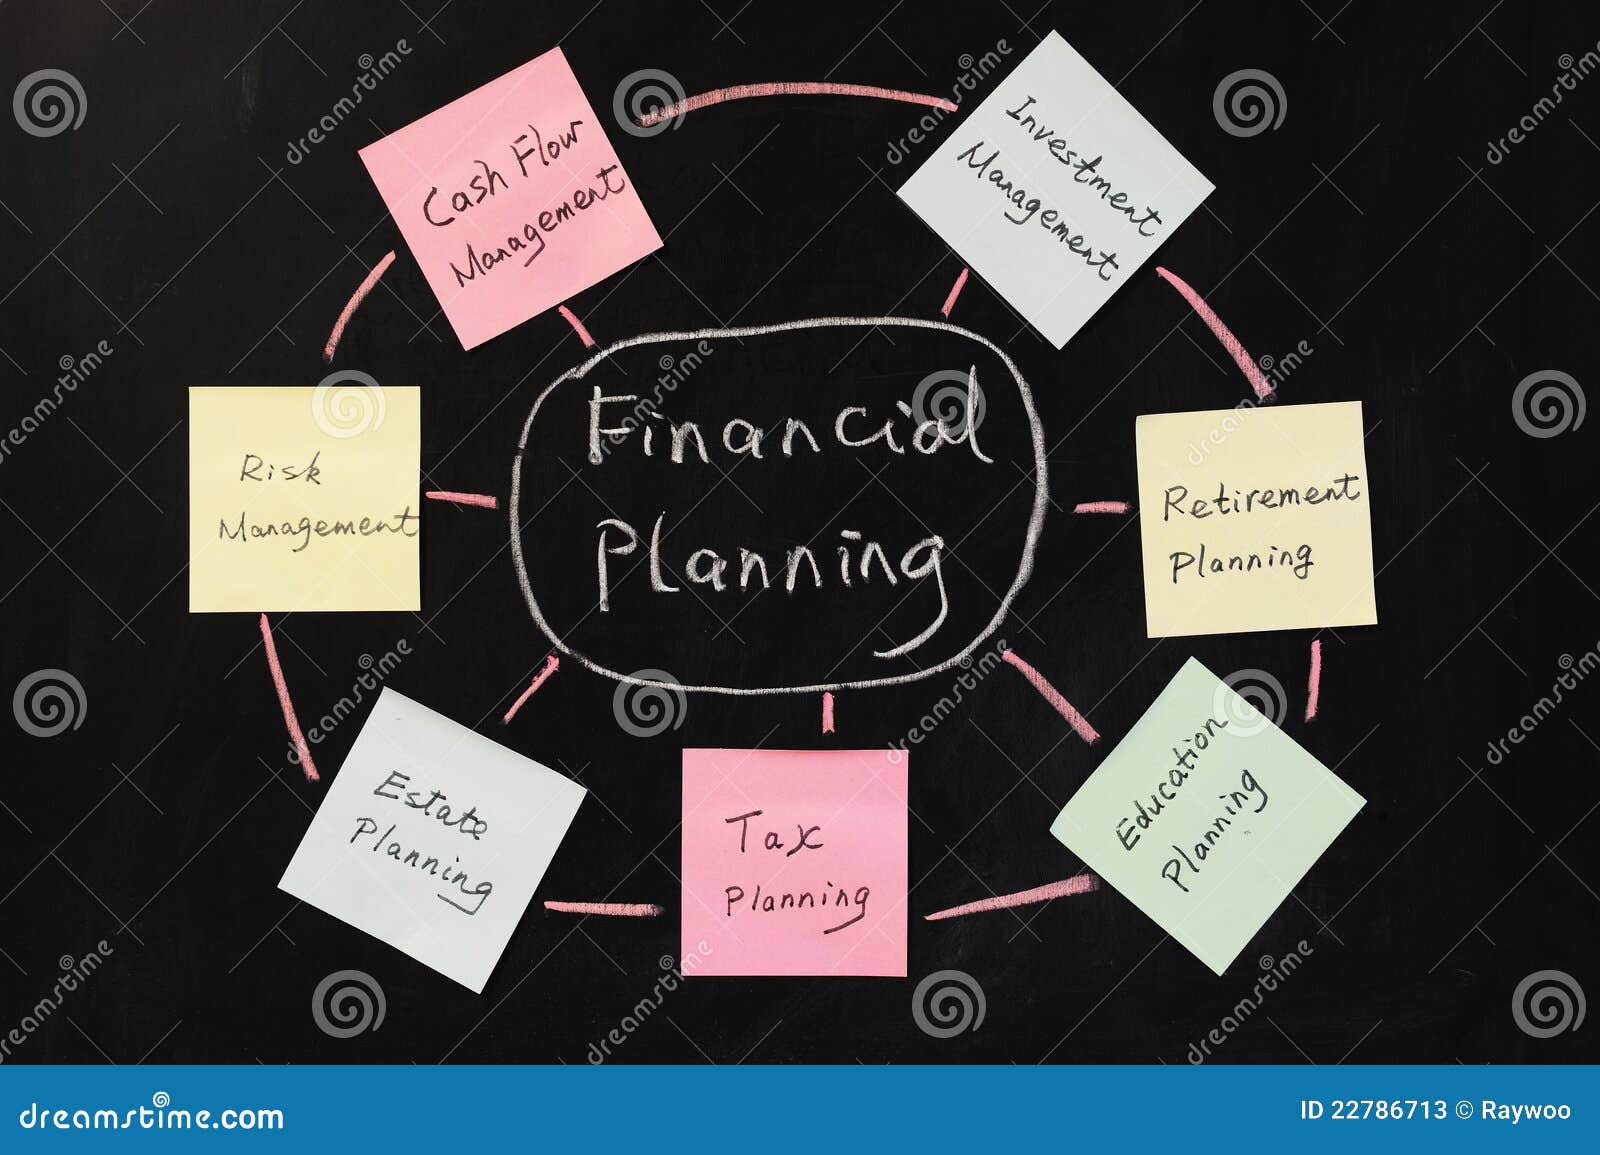 financial planning concept